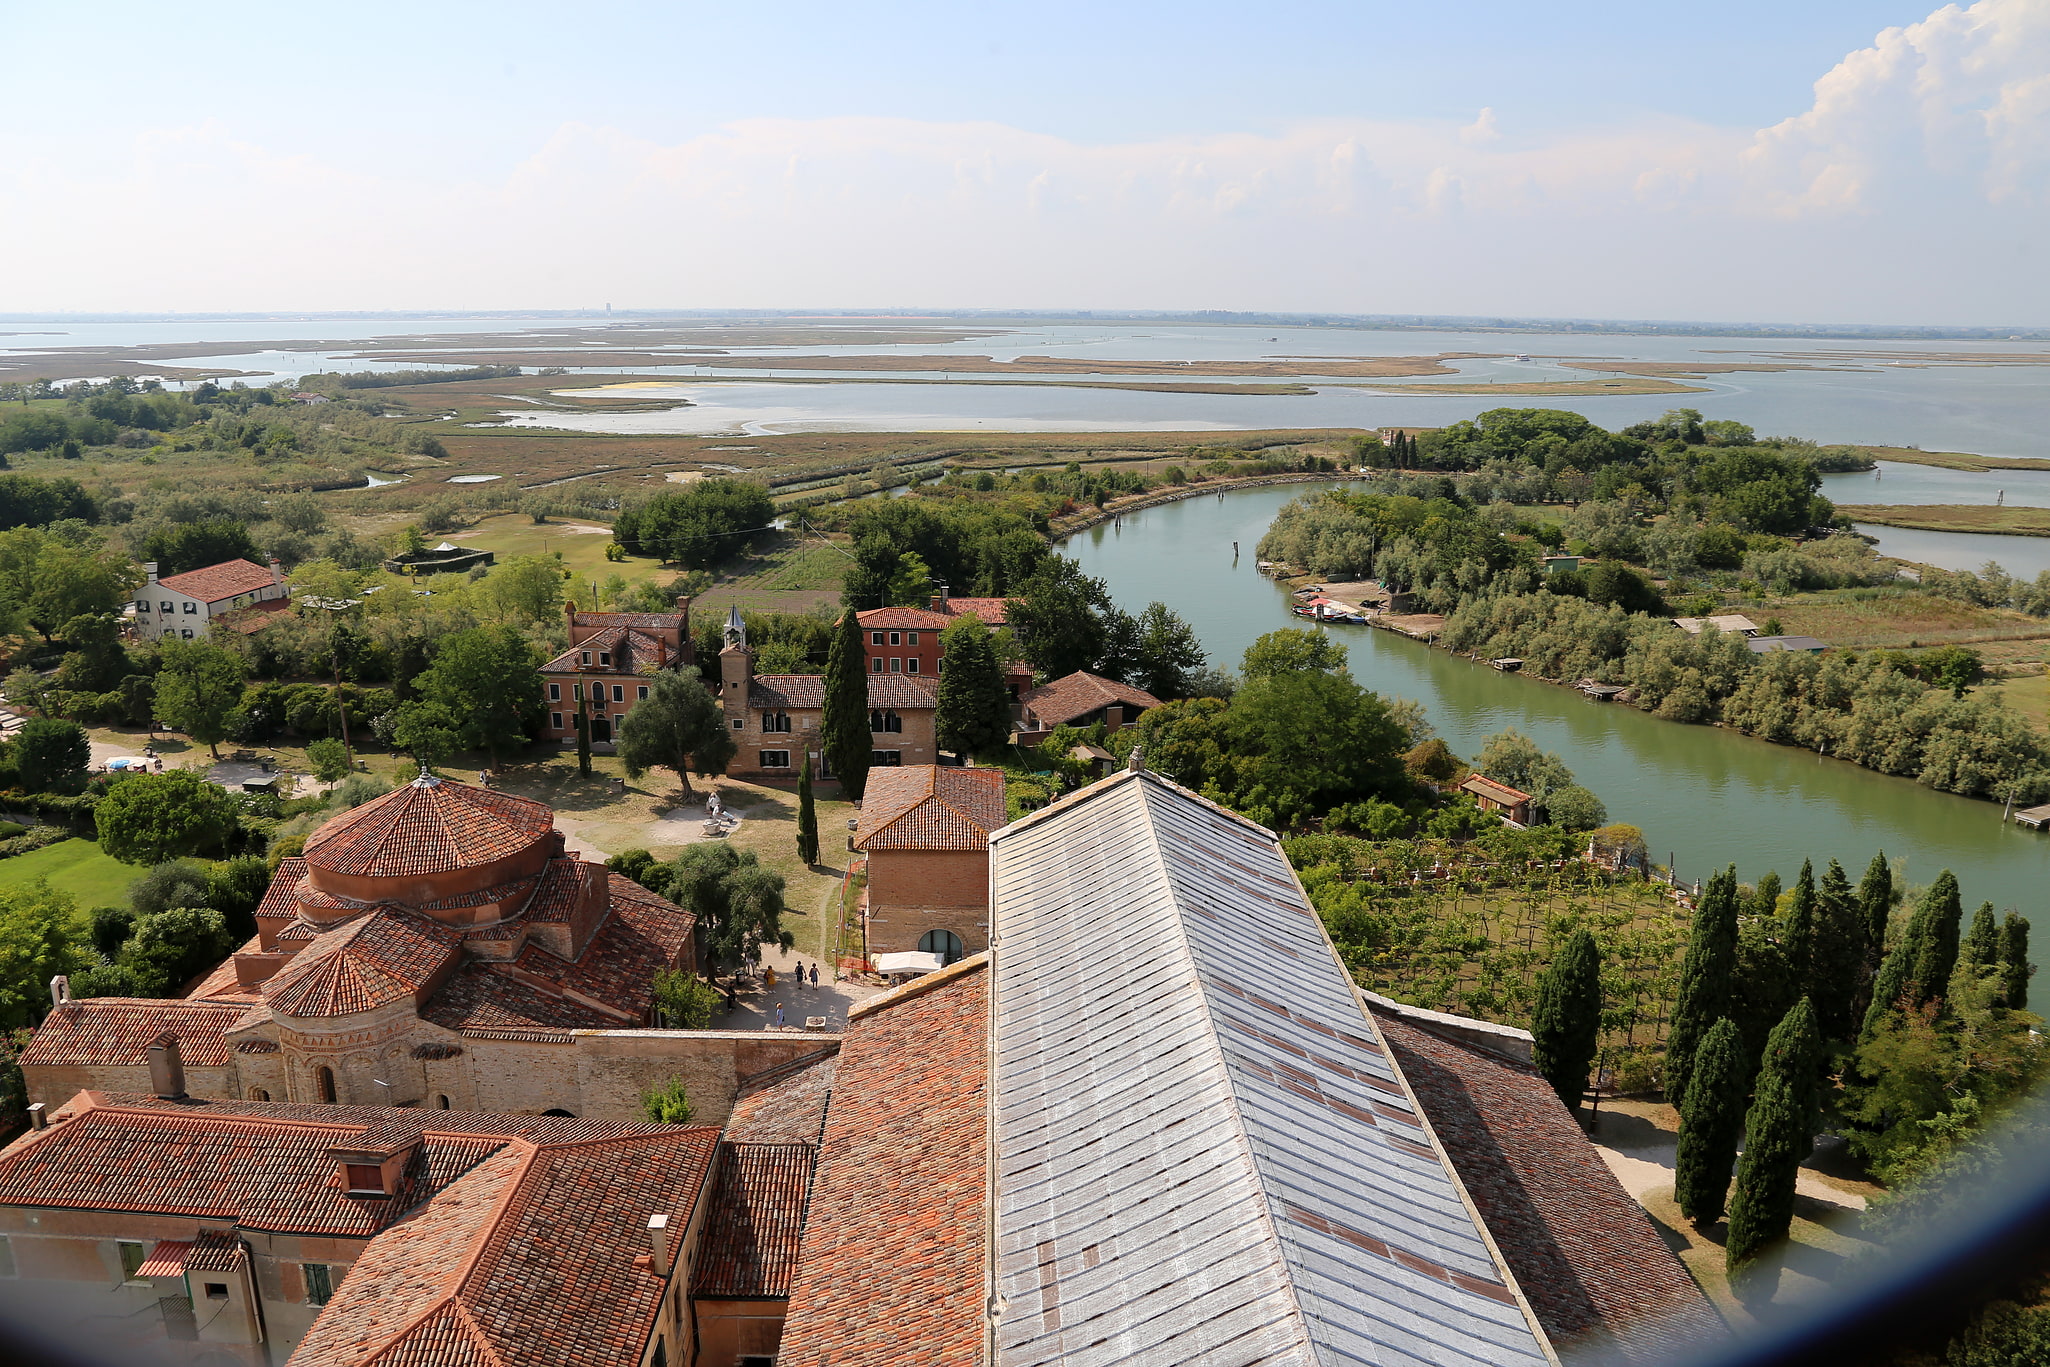 Torcello, Italy